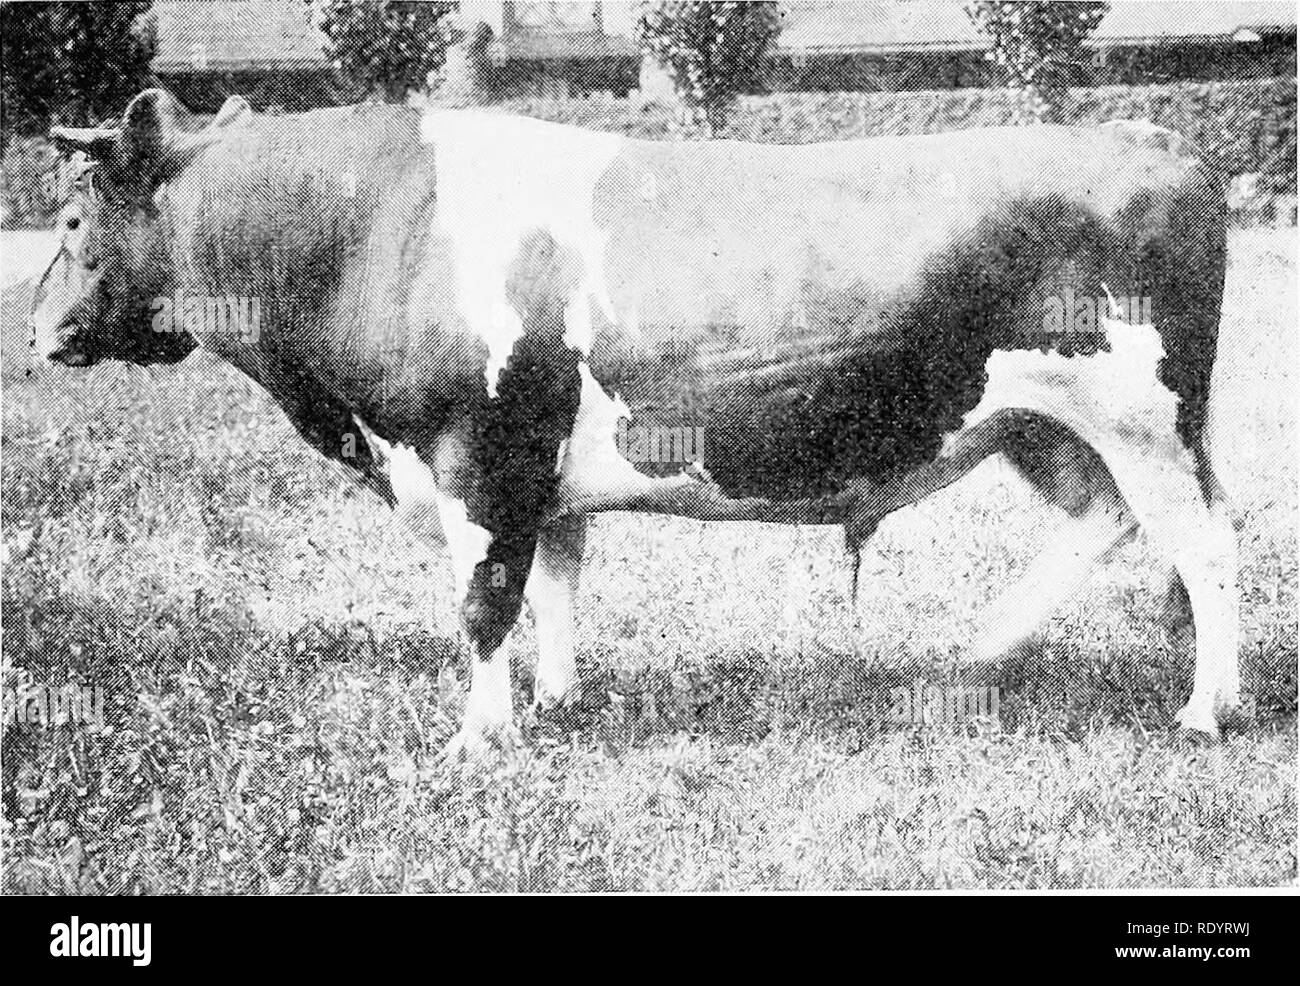 . The Guernsey breed. Guernsey cattle. The Guernsey Breei 129 In September, 1902, Mr. Twombly imported the l)ull Mav Rose King 8336, a dark-colored, smoky-nosed Indl and a son of May Rose 2d 3648, E. G. II. 1',., at a reported cost ..I $4,500. The records show that he was not accorded snch opportunities in the Florham herd as was Sheet Anchor, but he proved to be much superior as a sire. Mc had in all 2') registered daughters, and of this number 21 ha-e qualified for the ad- -anced registry, with average records up to 832.56 pdund.s Init-. Imp. Financier 8571, brougiit to America by V. Everi Stock Photo